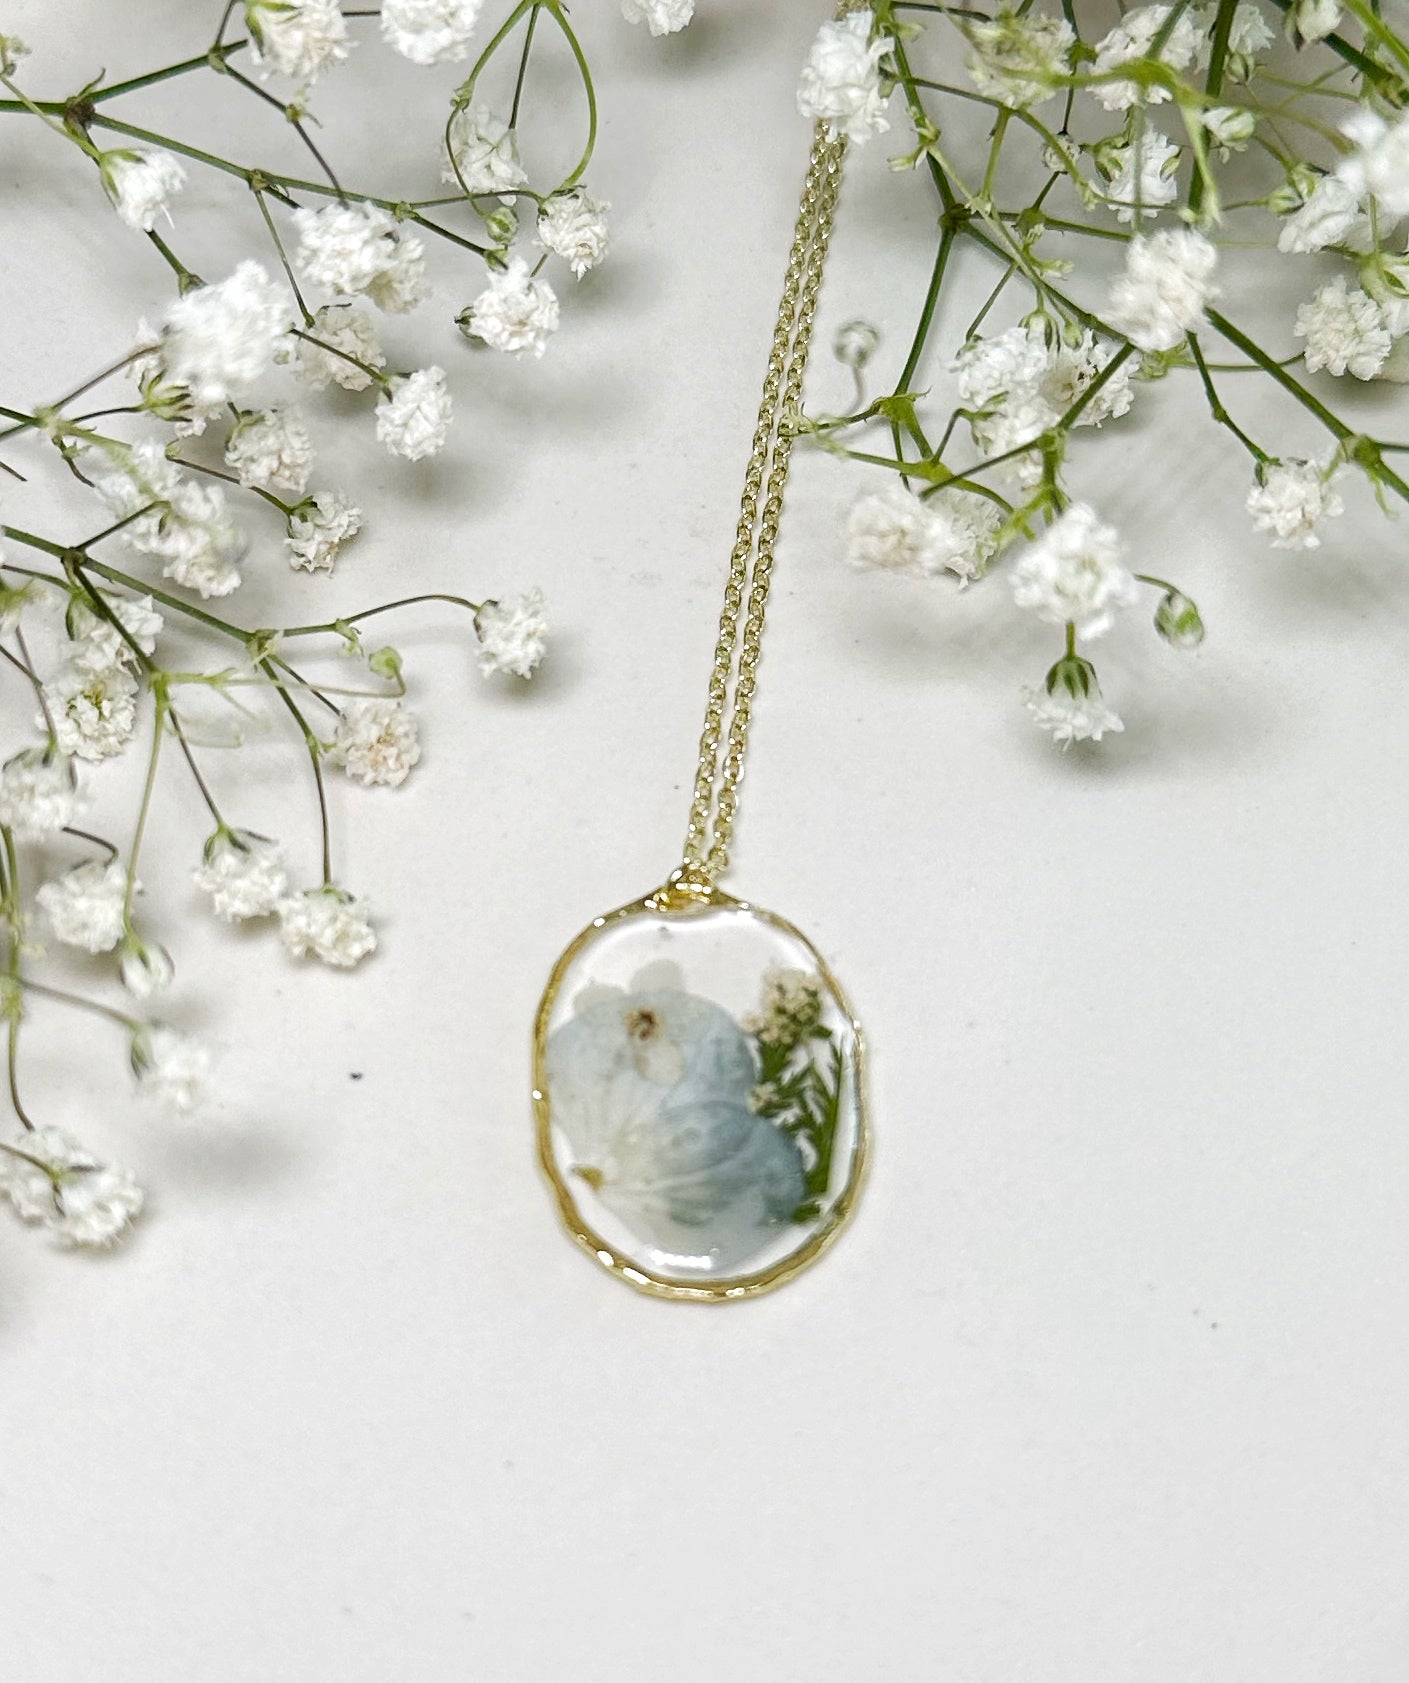 Garden Light Blue and White Necklace